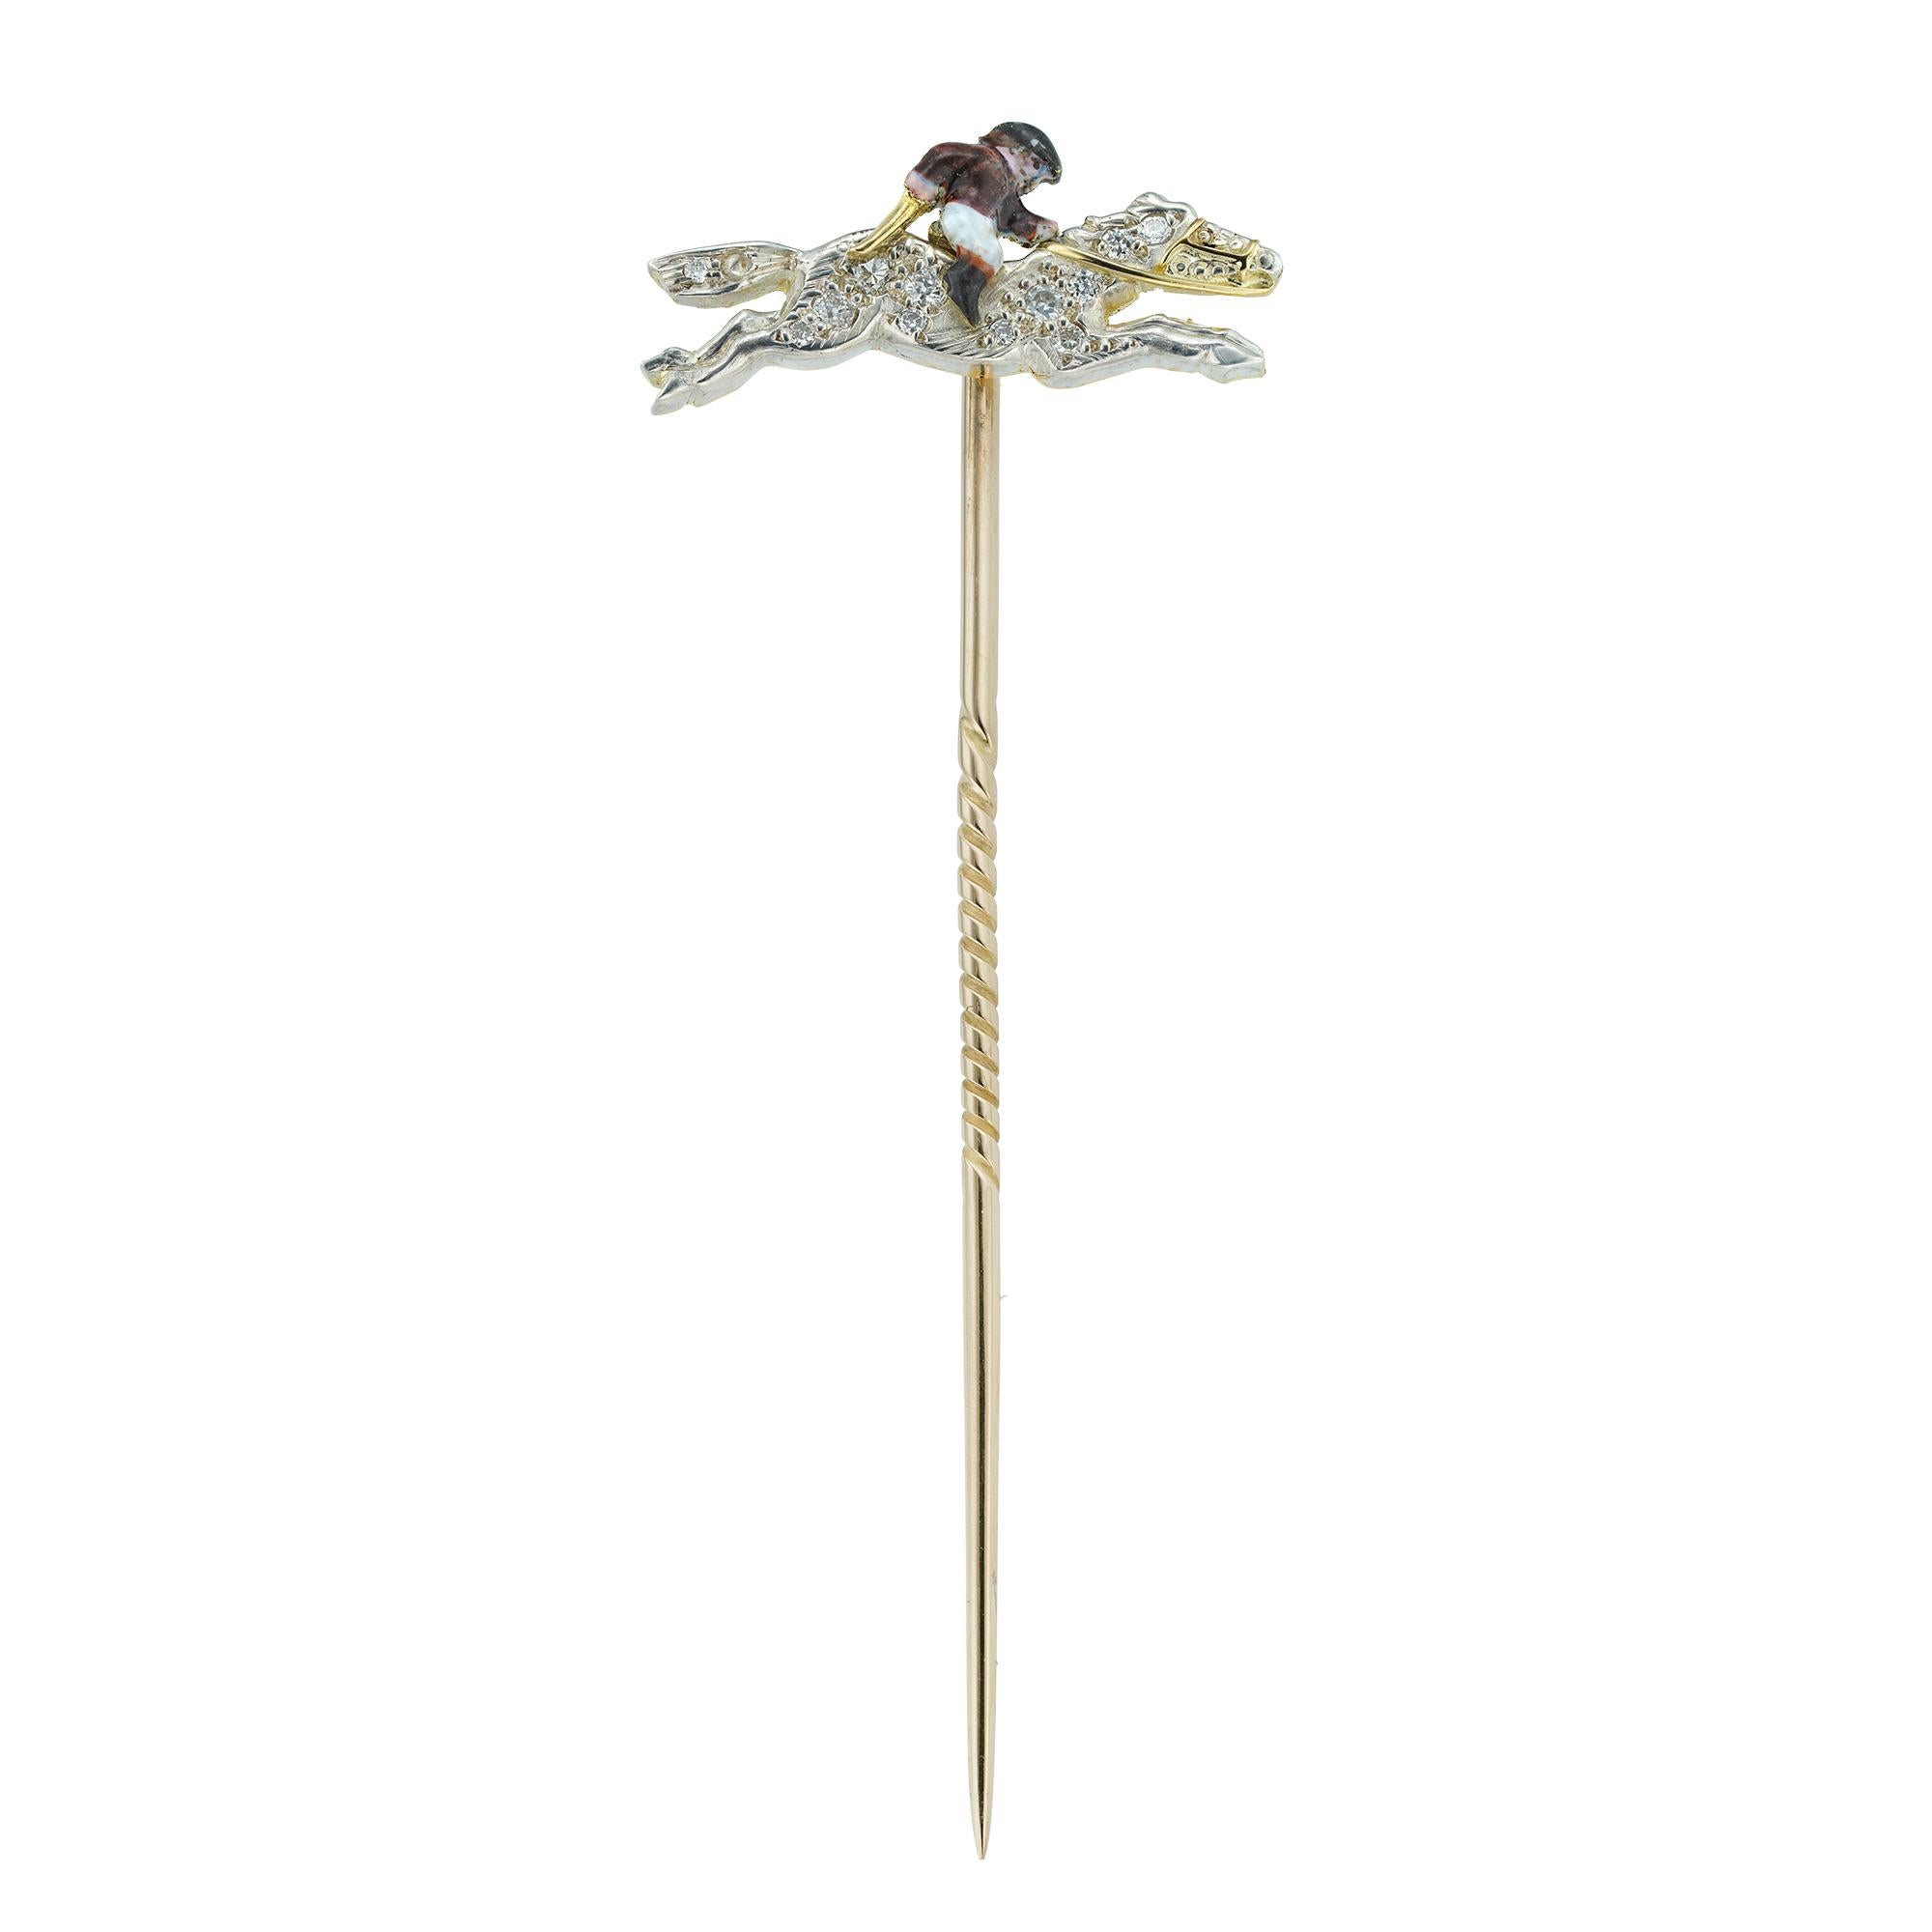 A horse and jockey tie pin, the horse jumping, set with old-cut diamonds with an enamelled jockey wearing brown and white silk racing colours, set in silver to a yellow gold back, circa 1950, the jewelled part measuring approximately 1cm long and